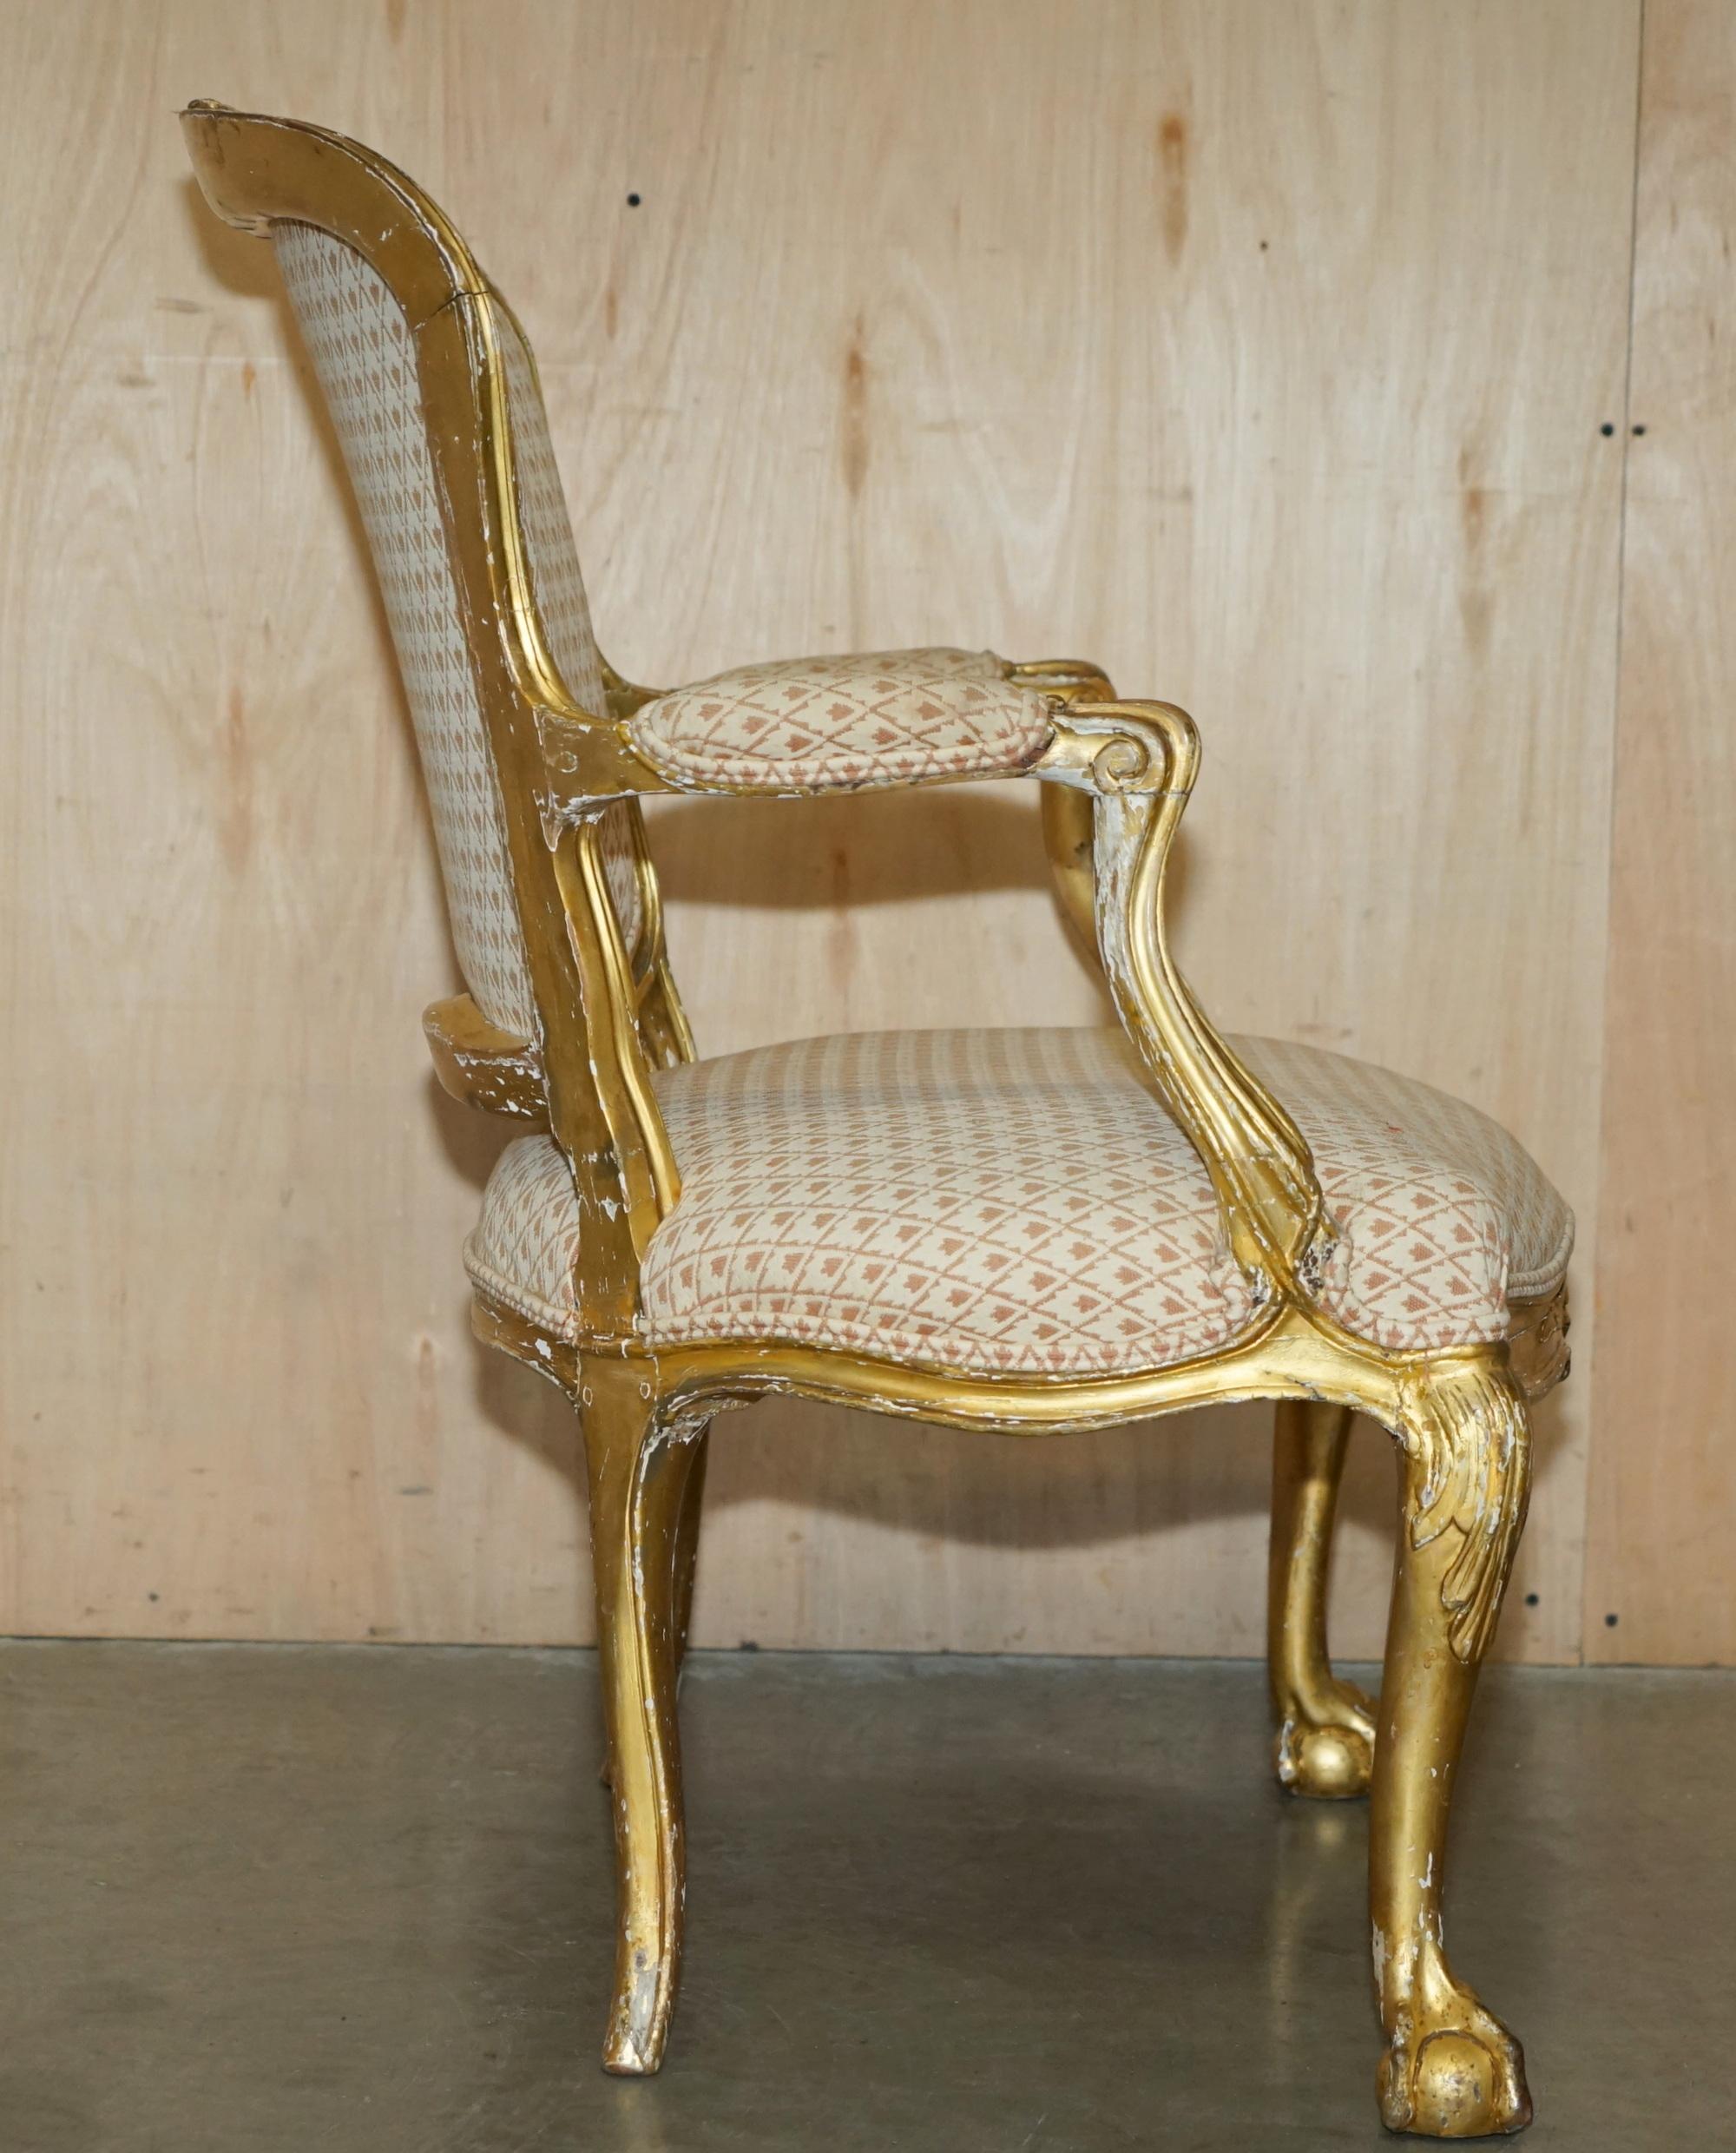 FINE GOLD GILTWOOD 18TH CENTURY CLAW & BALL FEET CARVED ANTIQUE BERGERE ARMCHAiR For Sale 8